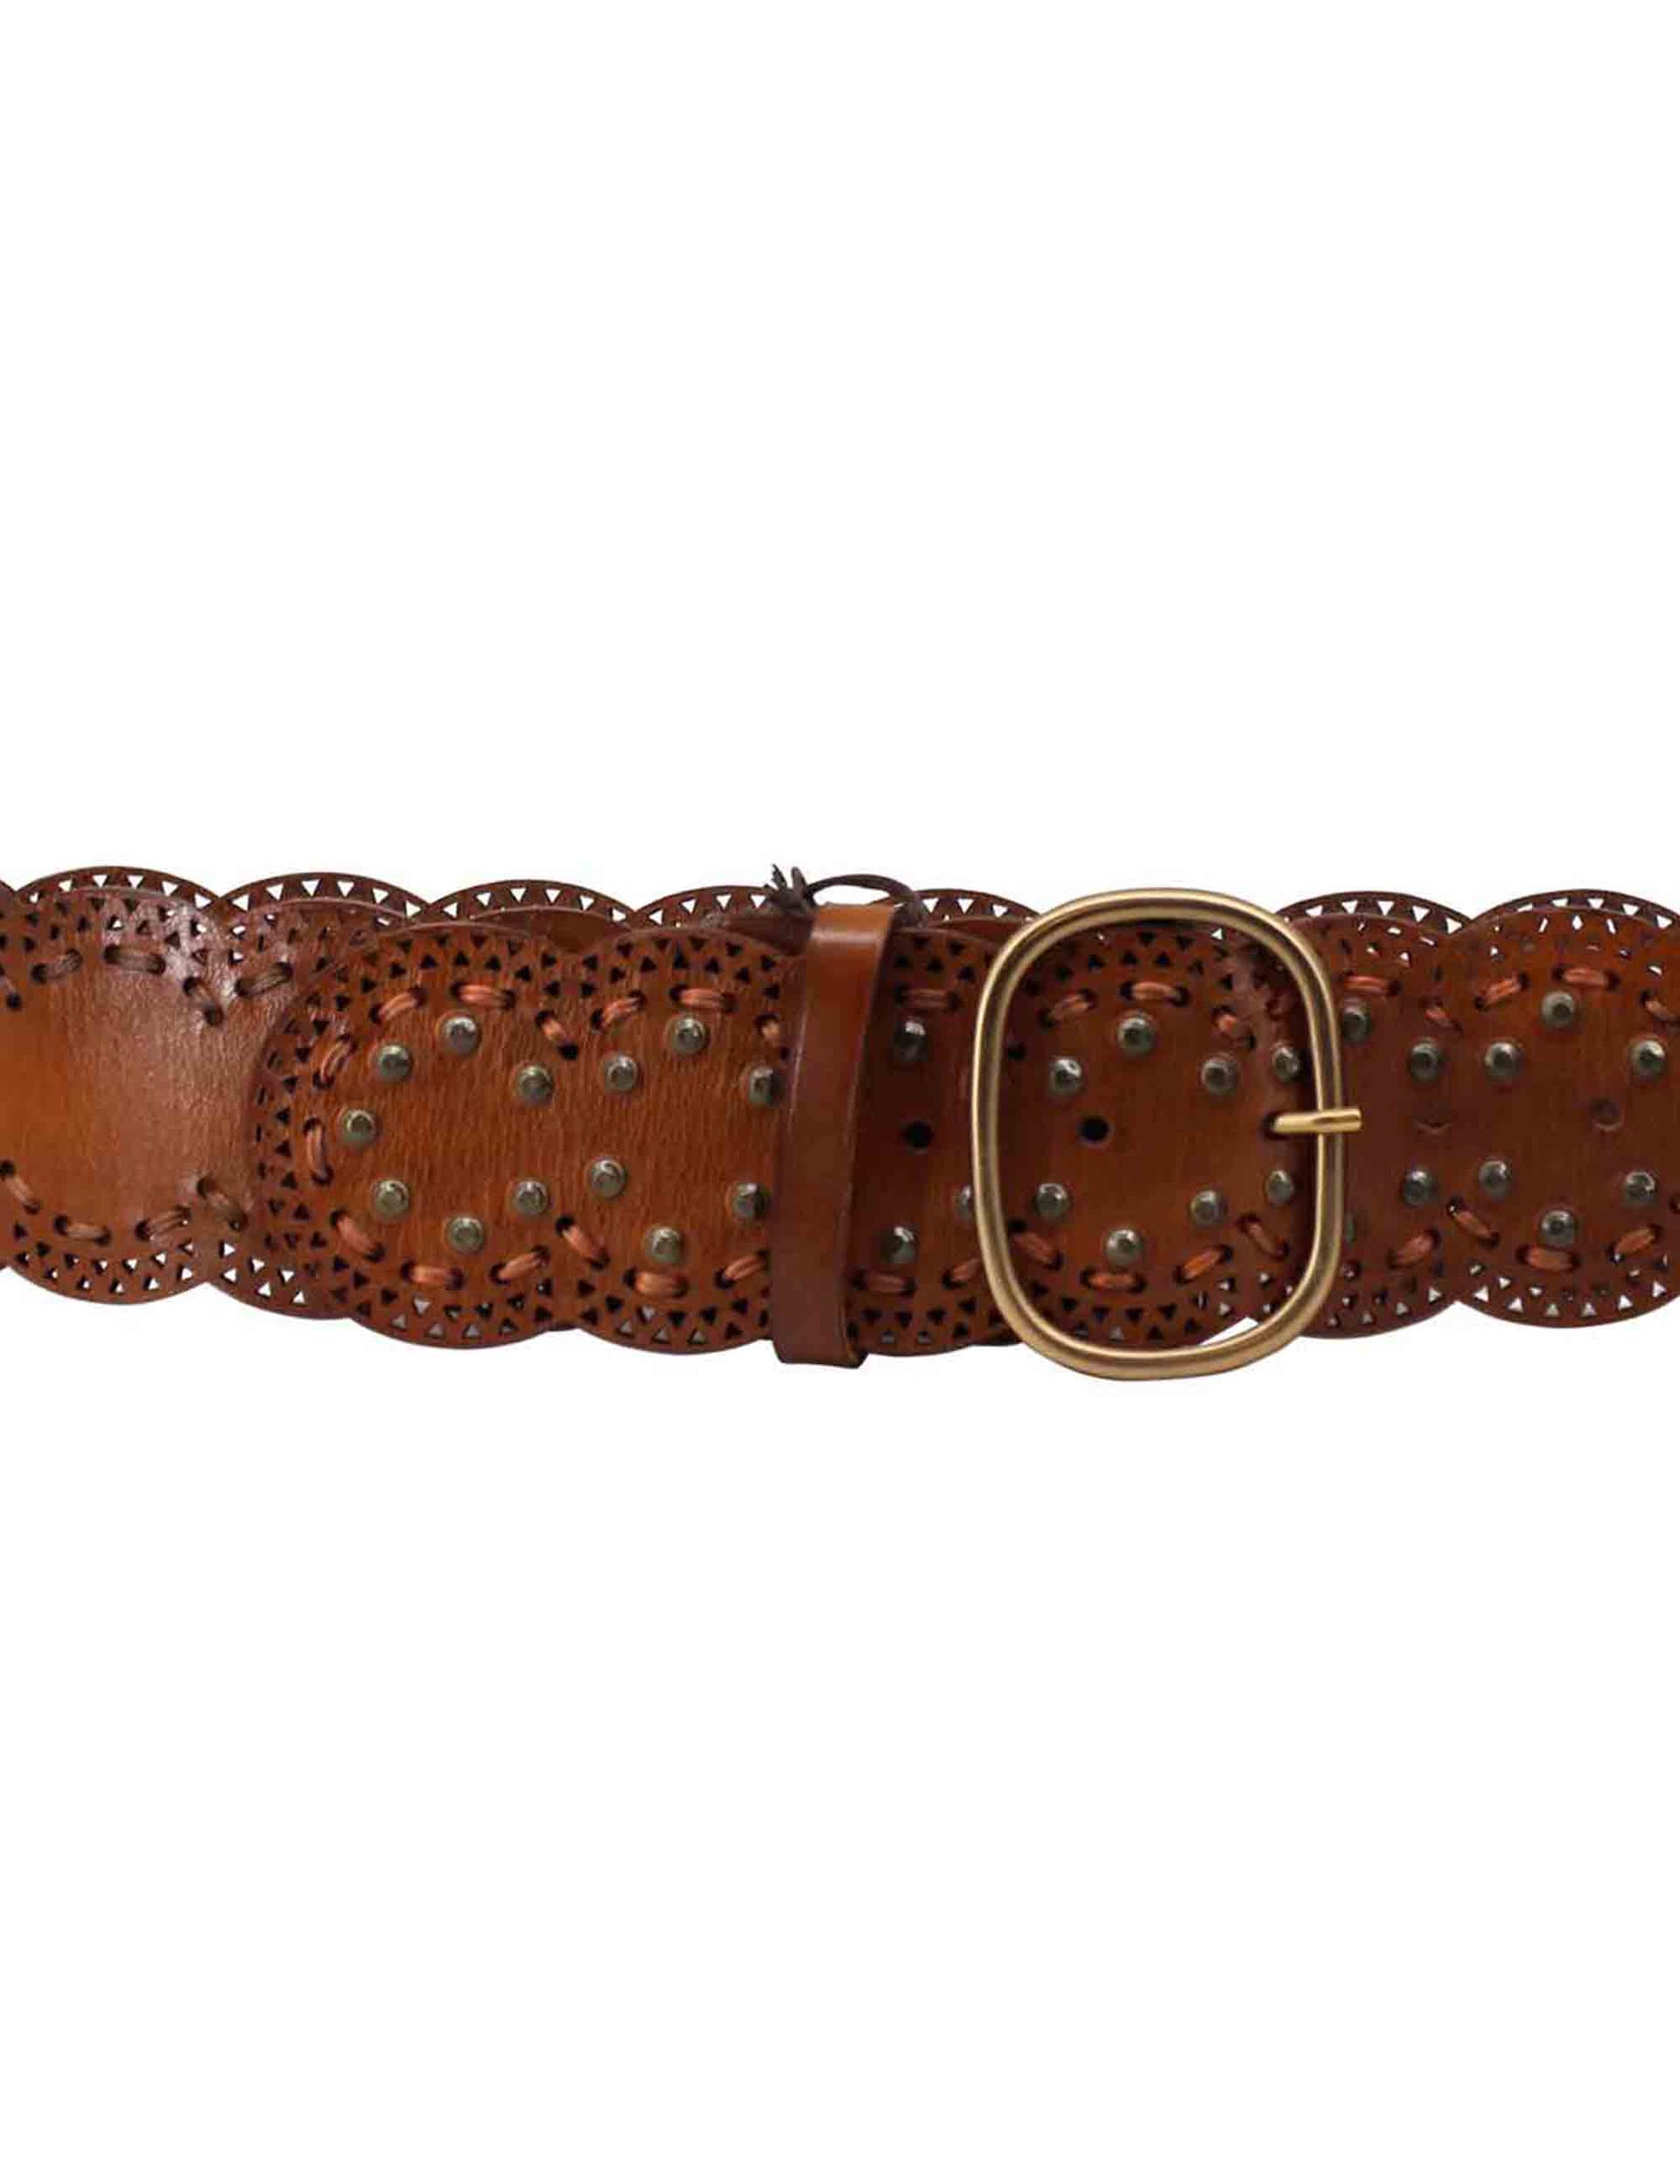 Women's tan leather belts with buckle and studs